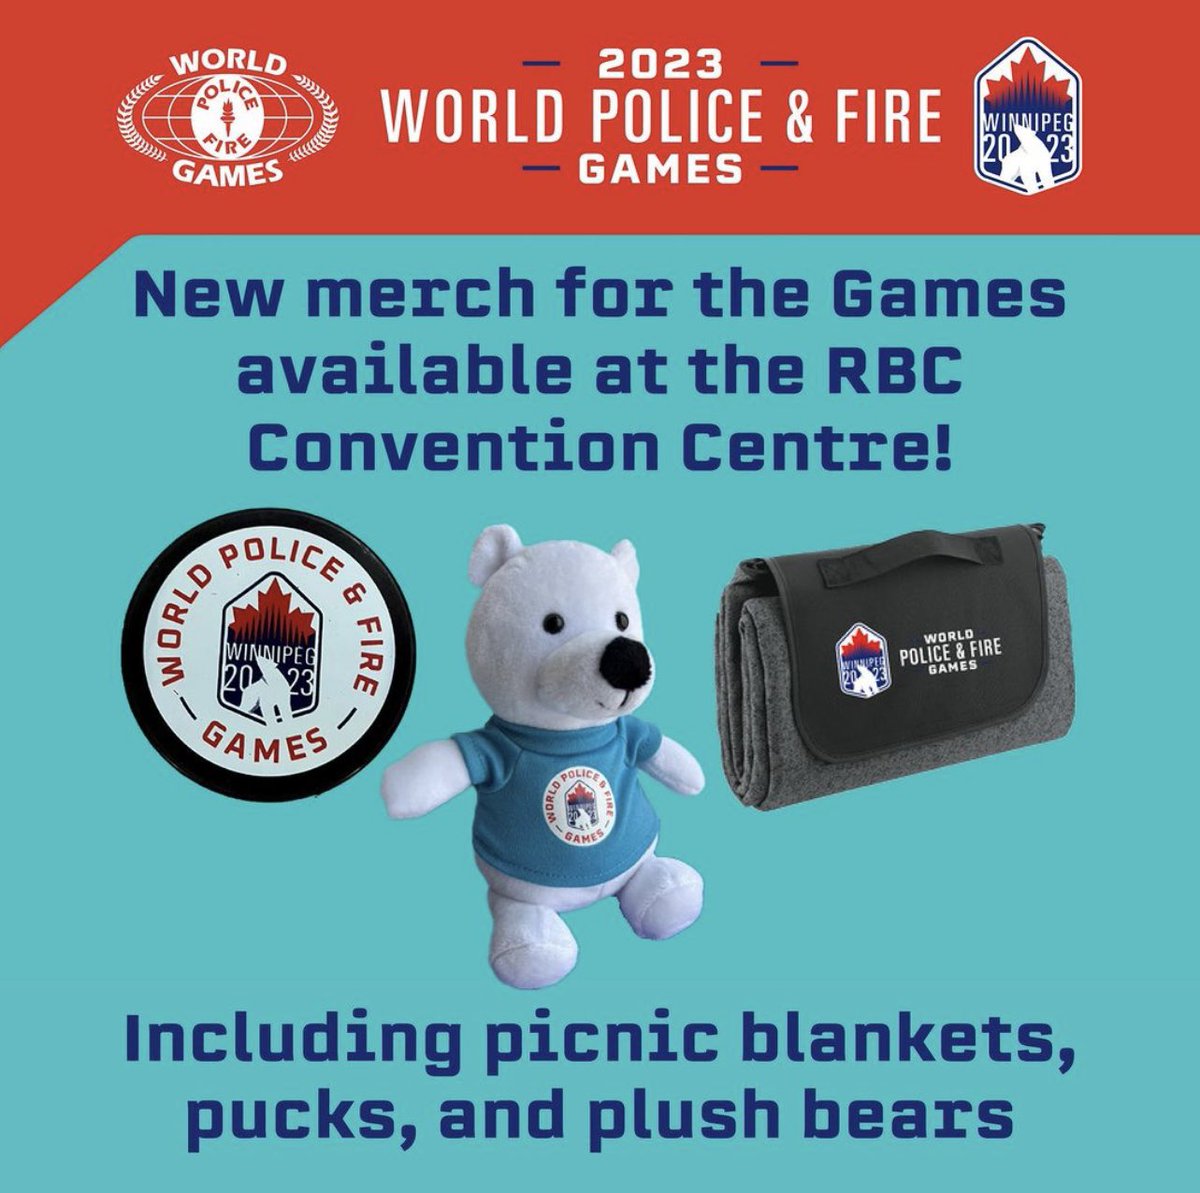 Check out the Games time merchandise now available at the RBC Convention Centre! 

#Winnipeg #OnlyInThePeg #Canada #Manitoba #SeeYouinWinnipeg #FirstResponders #WPFG #2023WPFG #FrontLinetoFinishLine #Sports #Merchandise